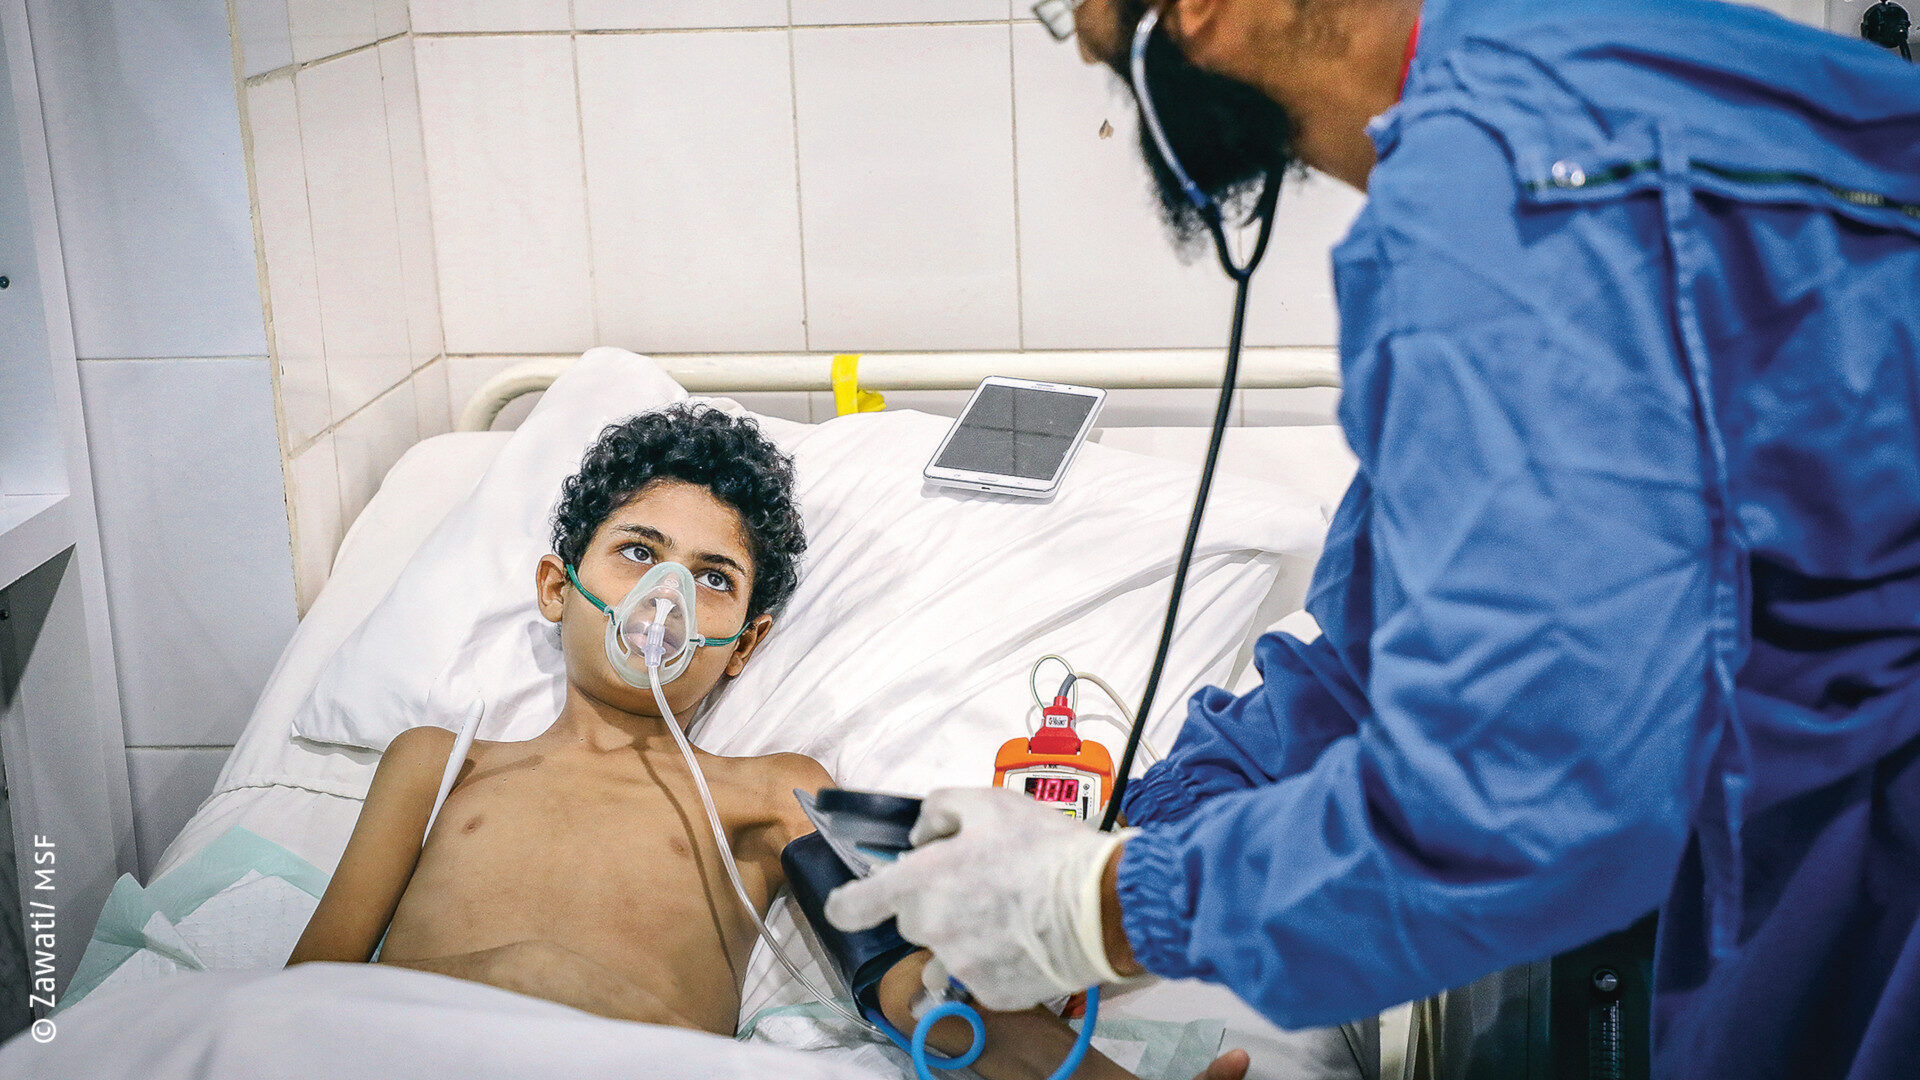 Yemen: More than 90,000 war wounded treated